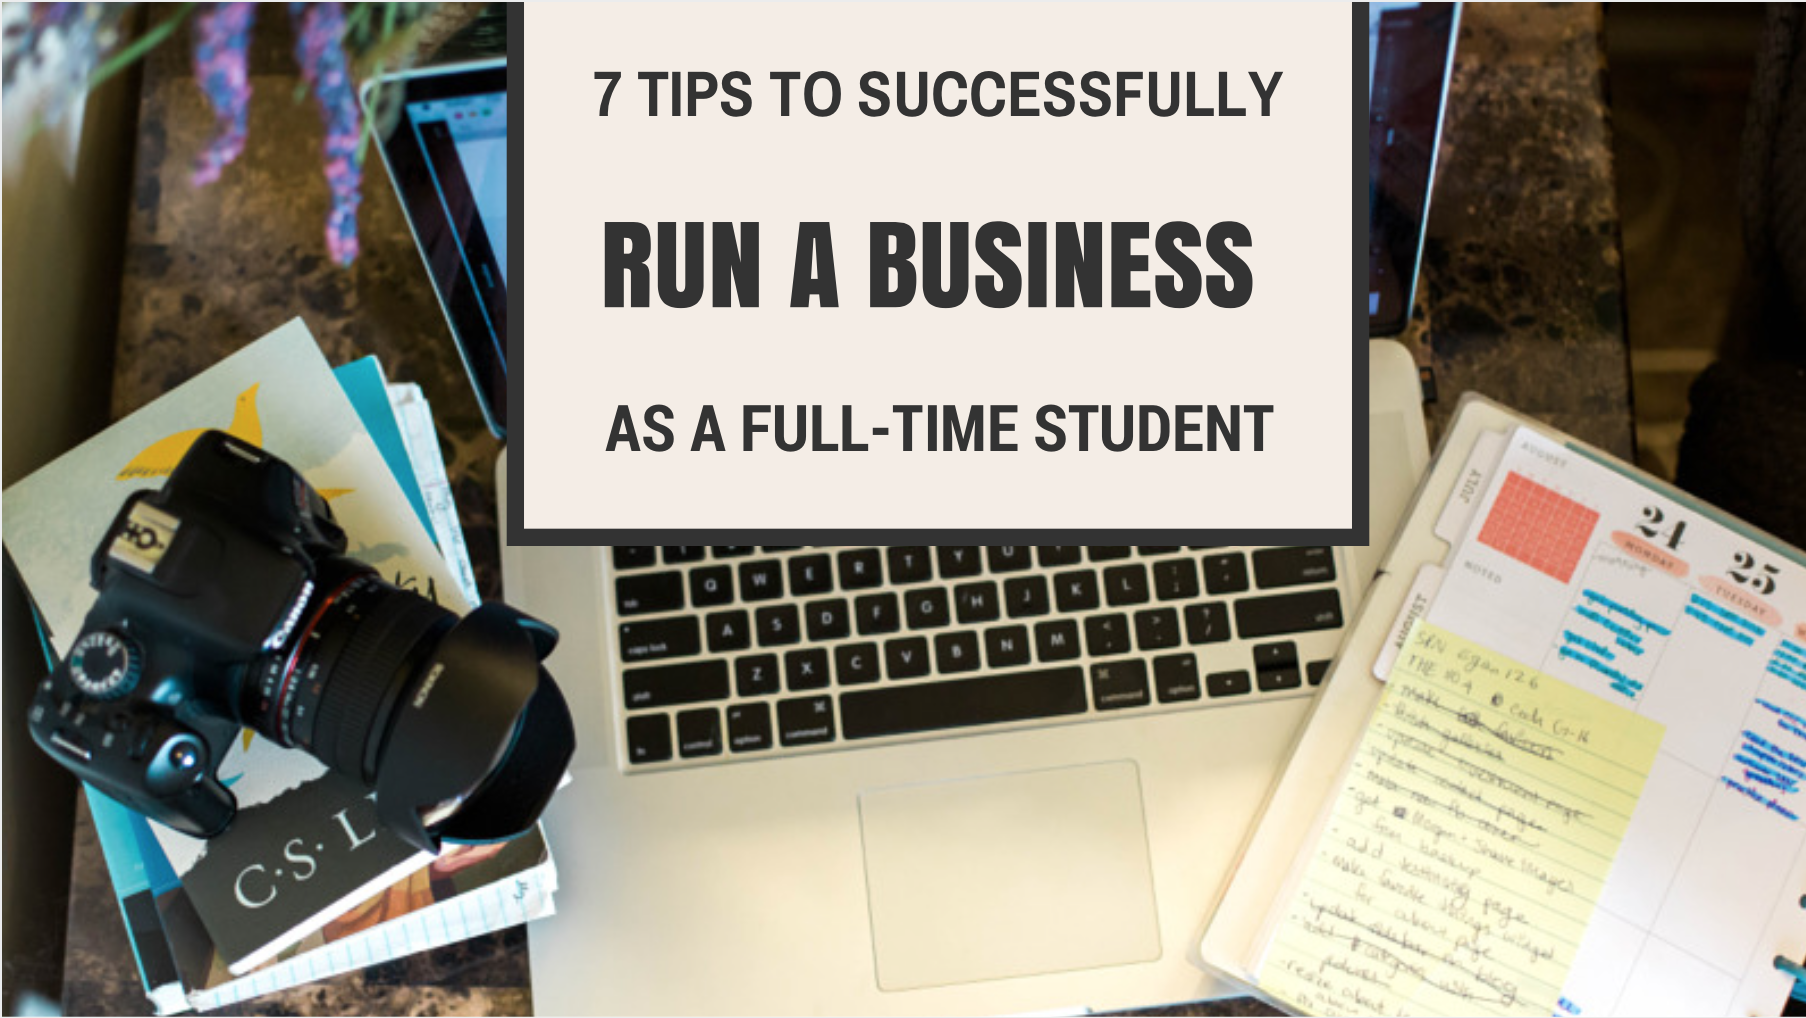 7-tips-to-successfully-run-business-as-fulltime-student